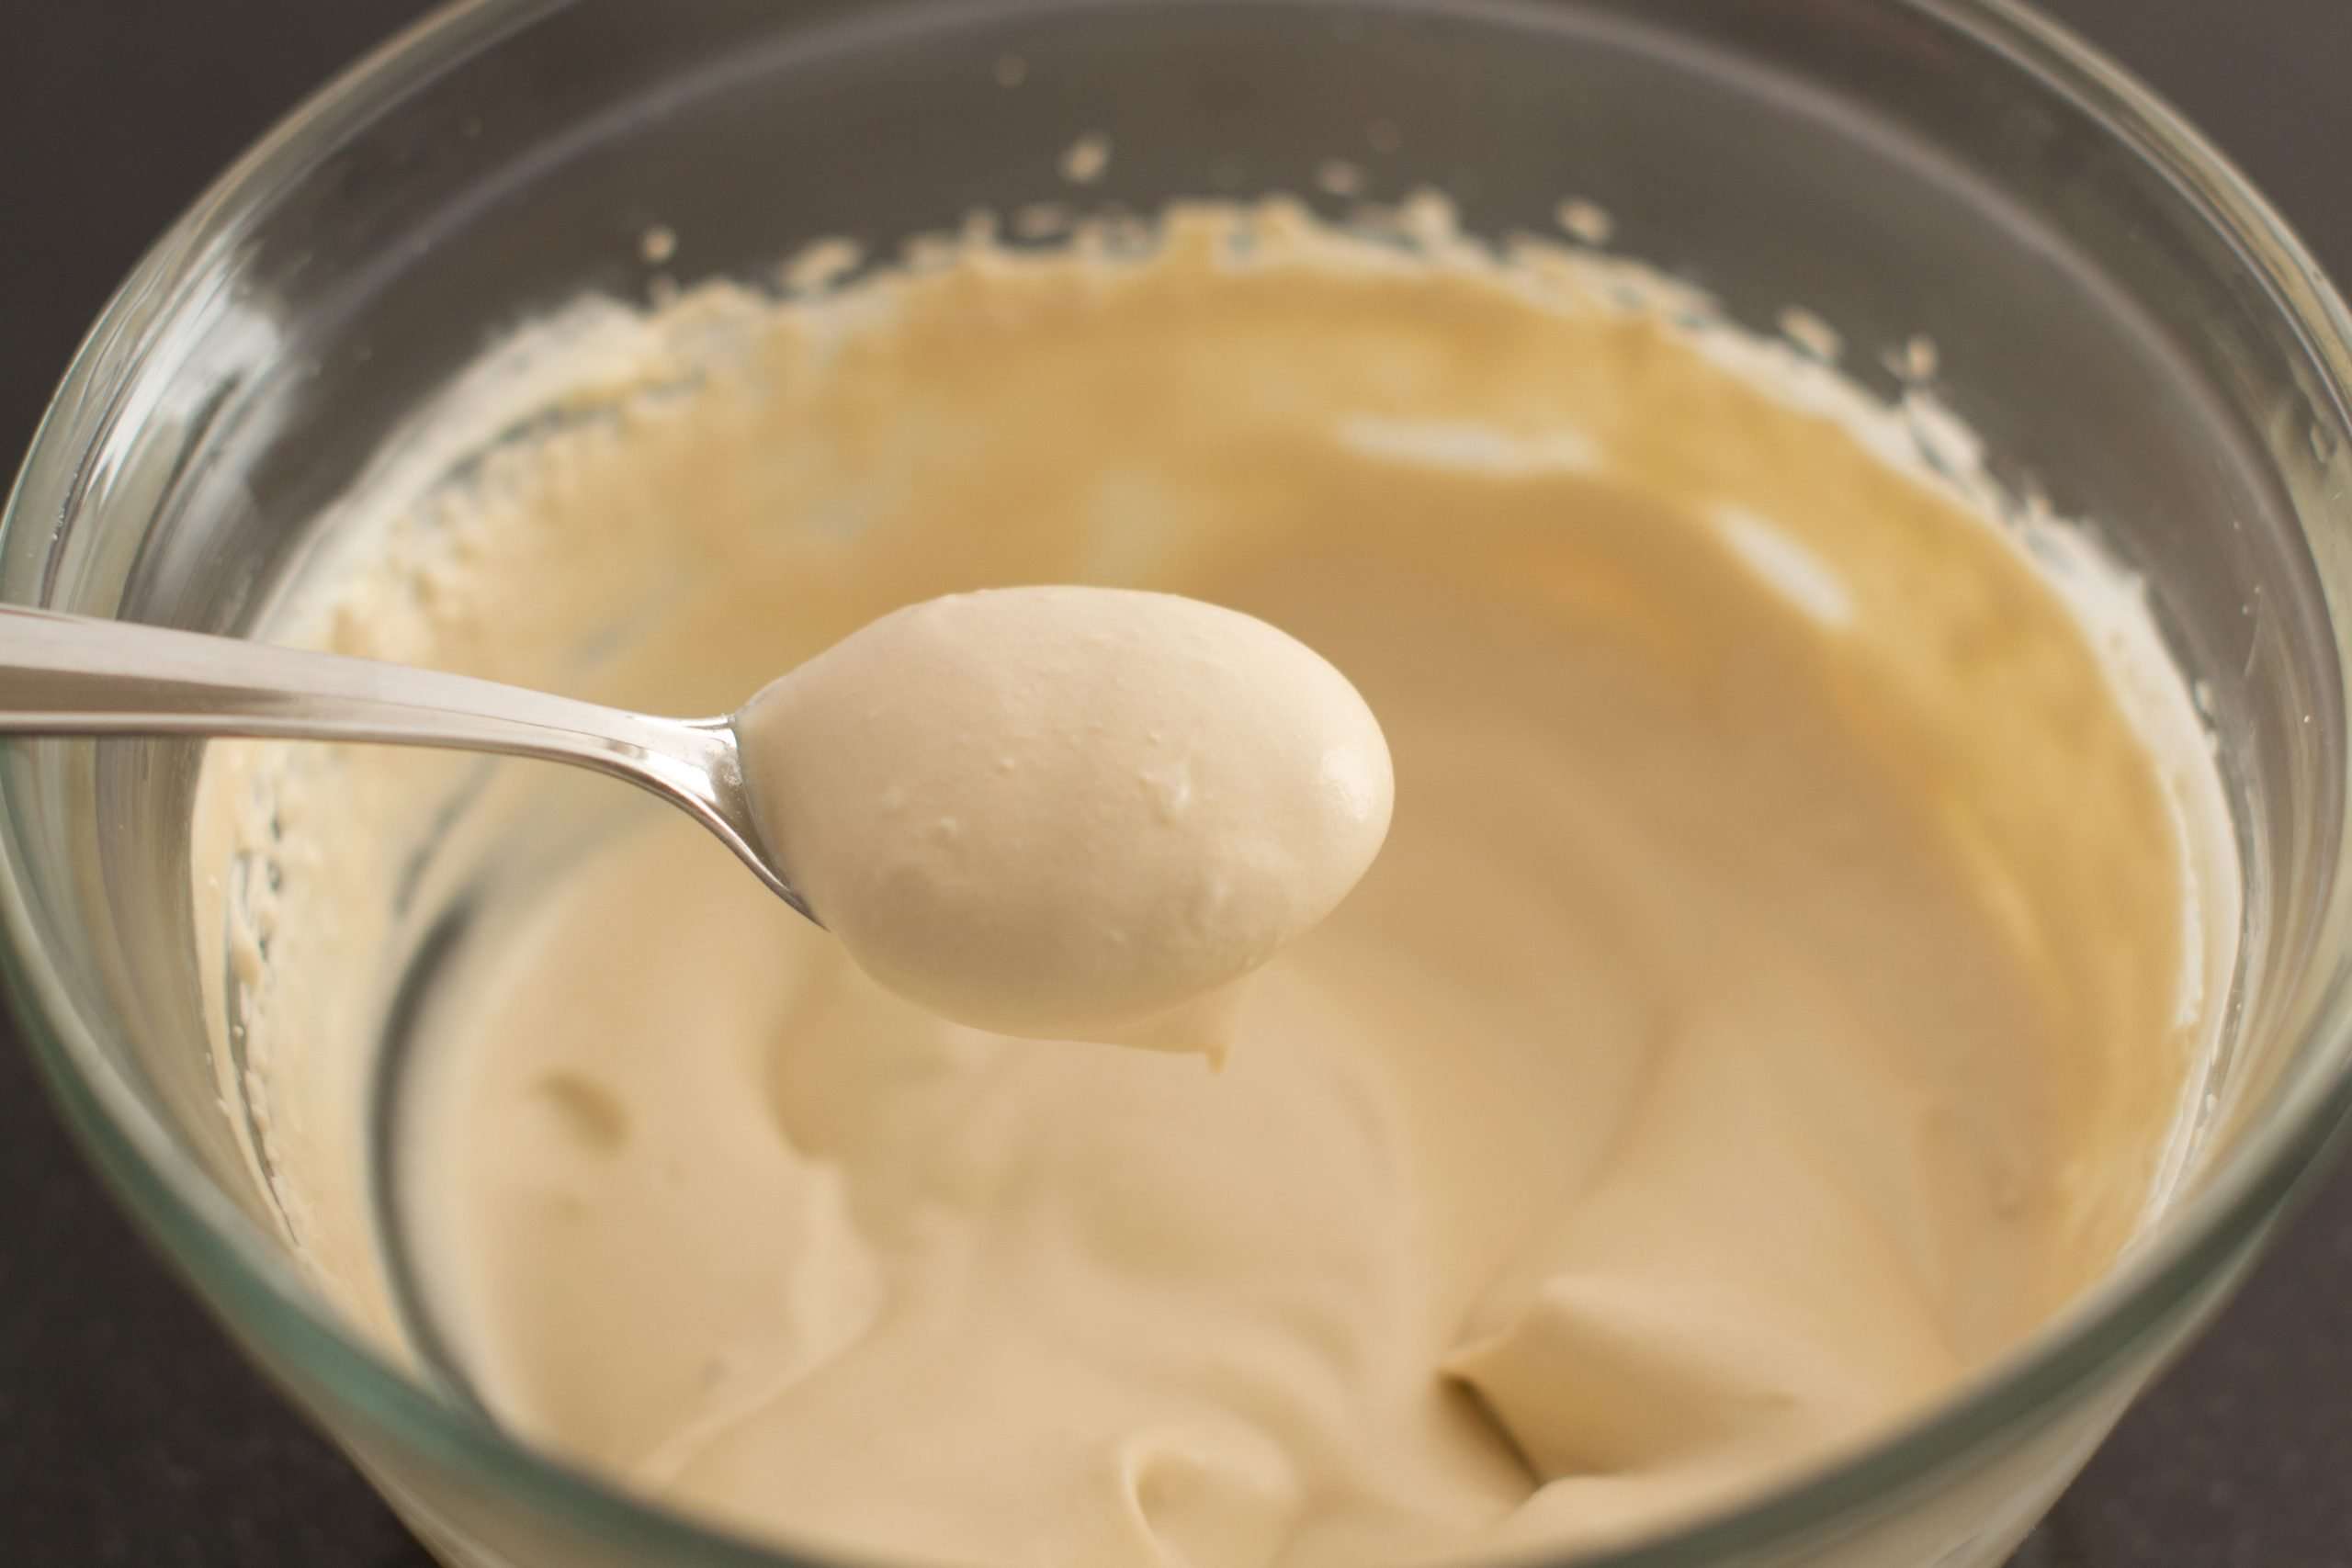 How to Make Coffee Cream: 4 Steps (with Pictures)